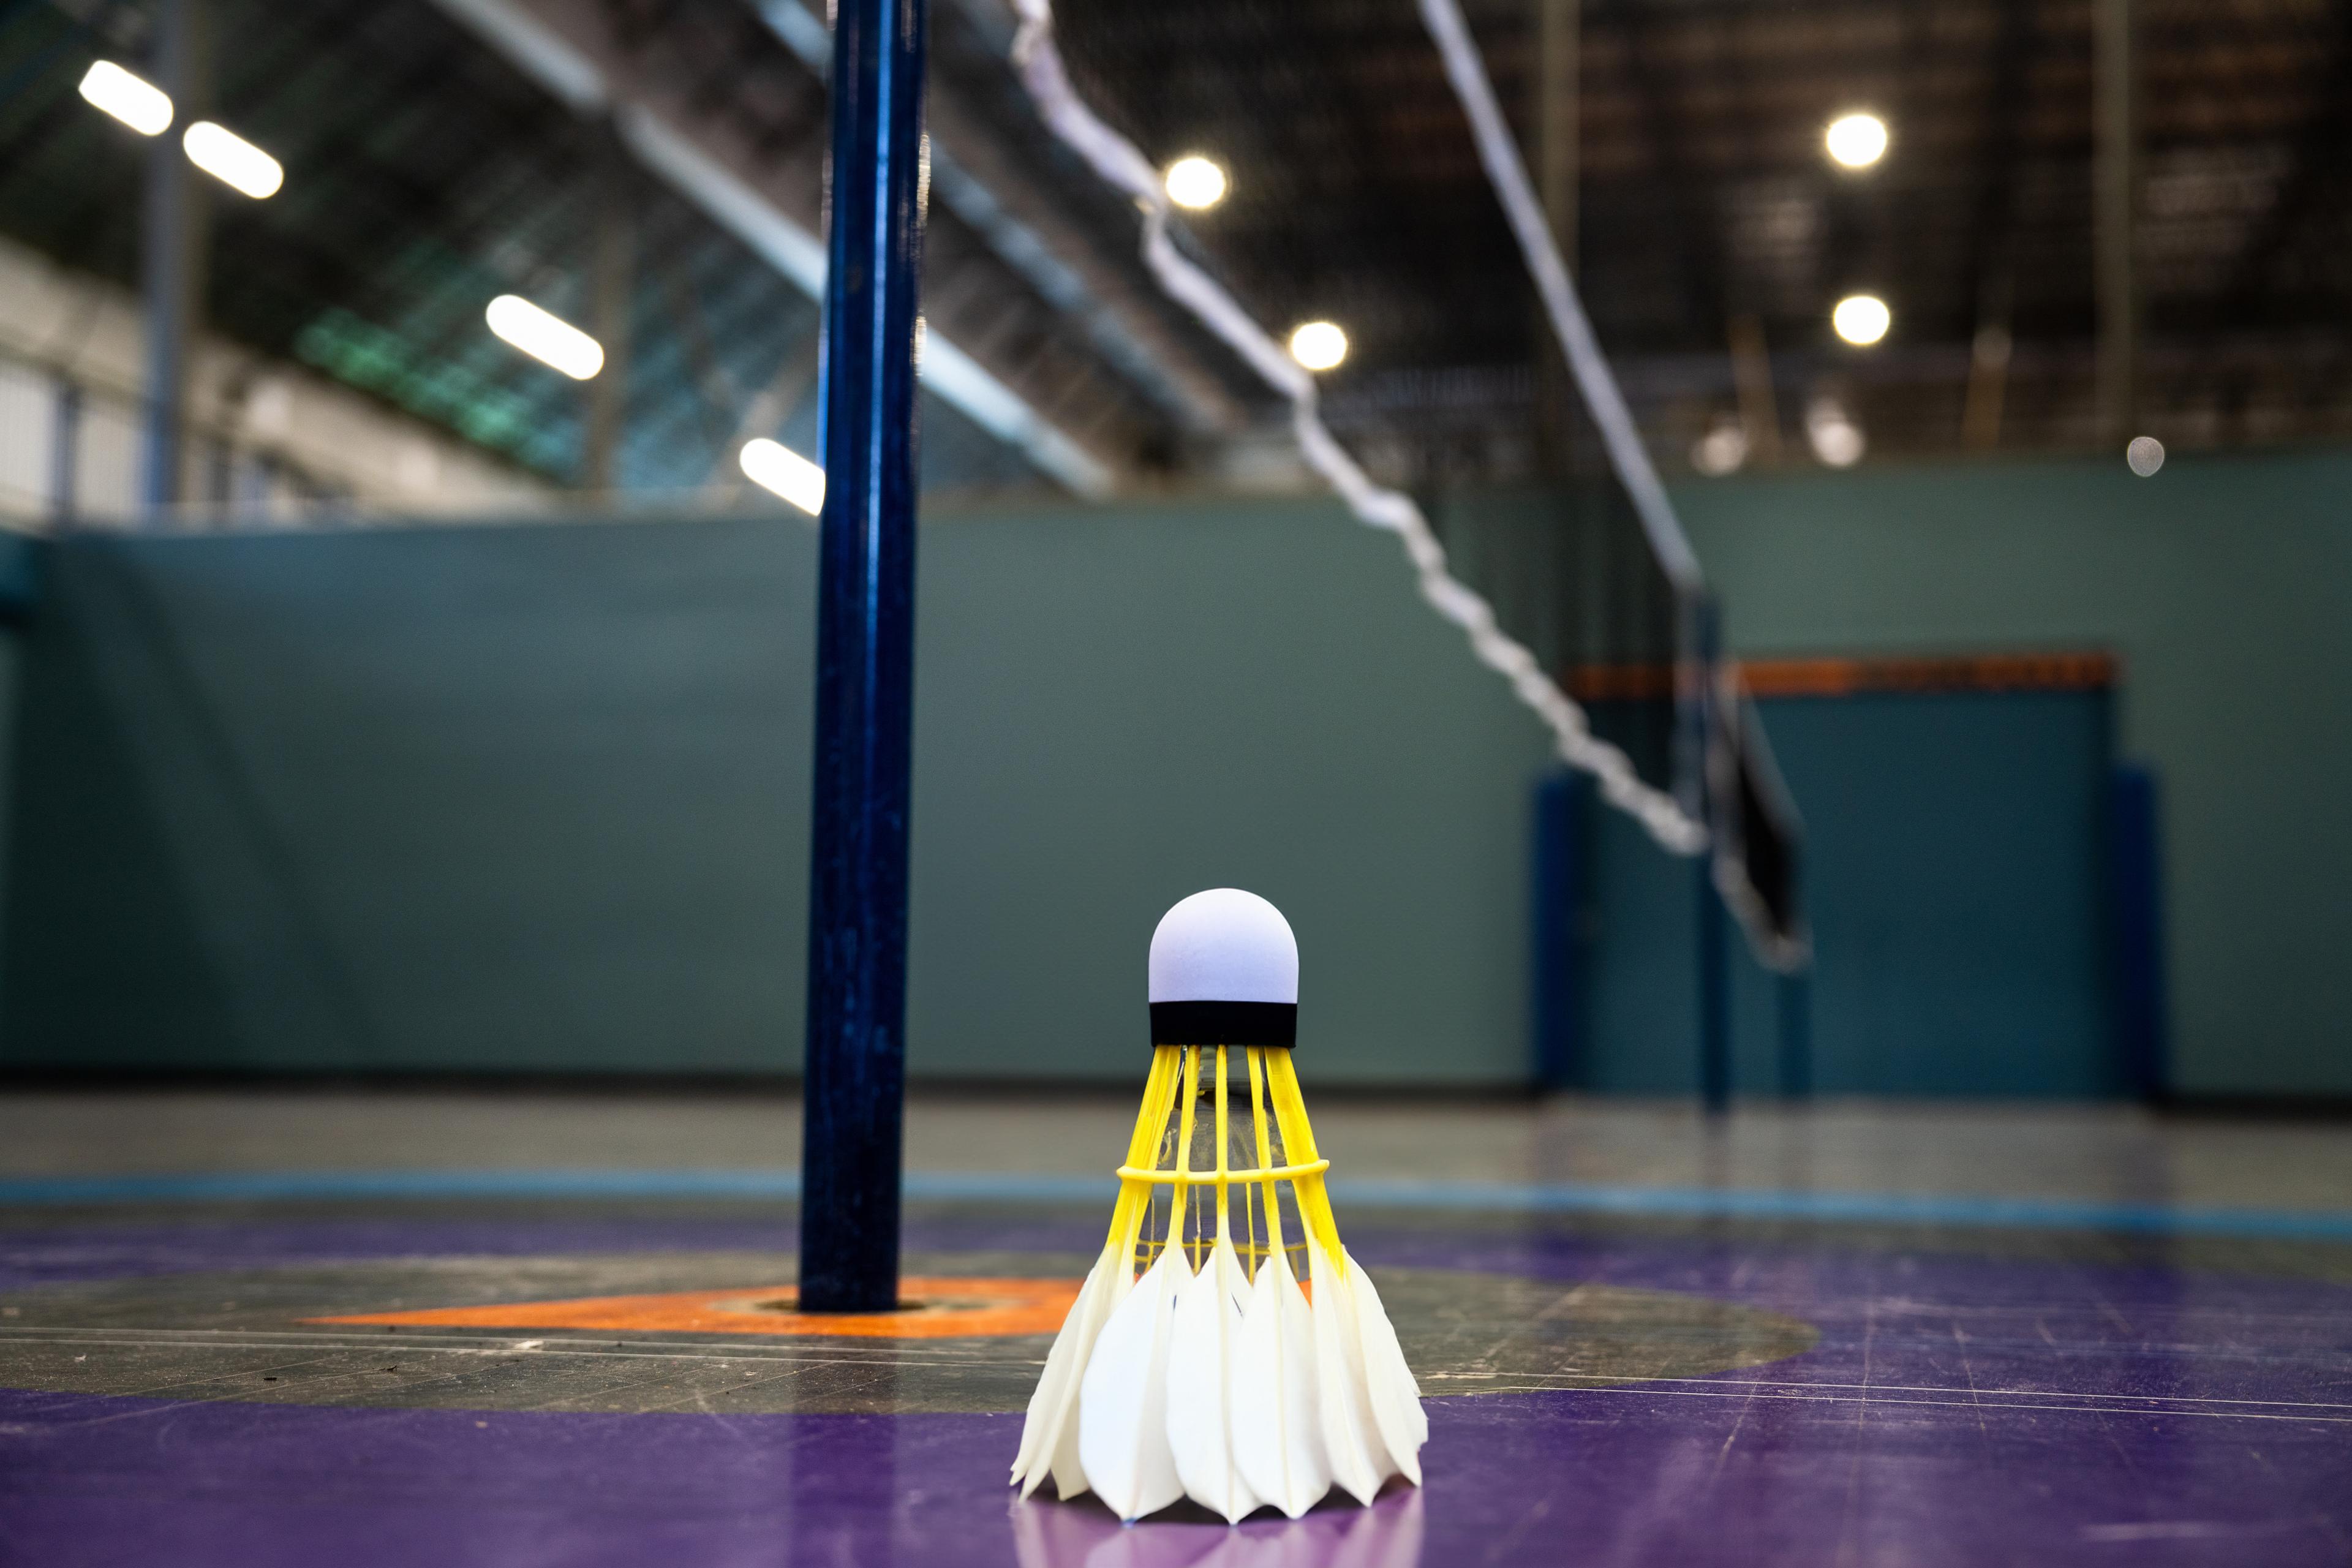 an image of a Badminton Shuttlecock standing upright next to a Badminton Net in a gymnasium.